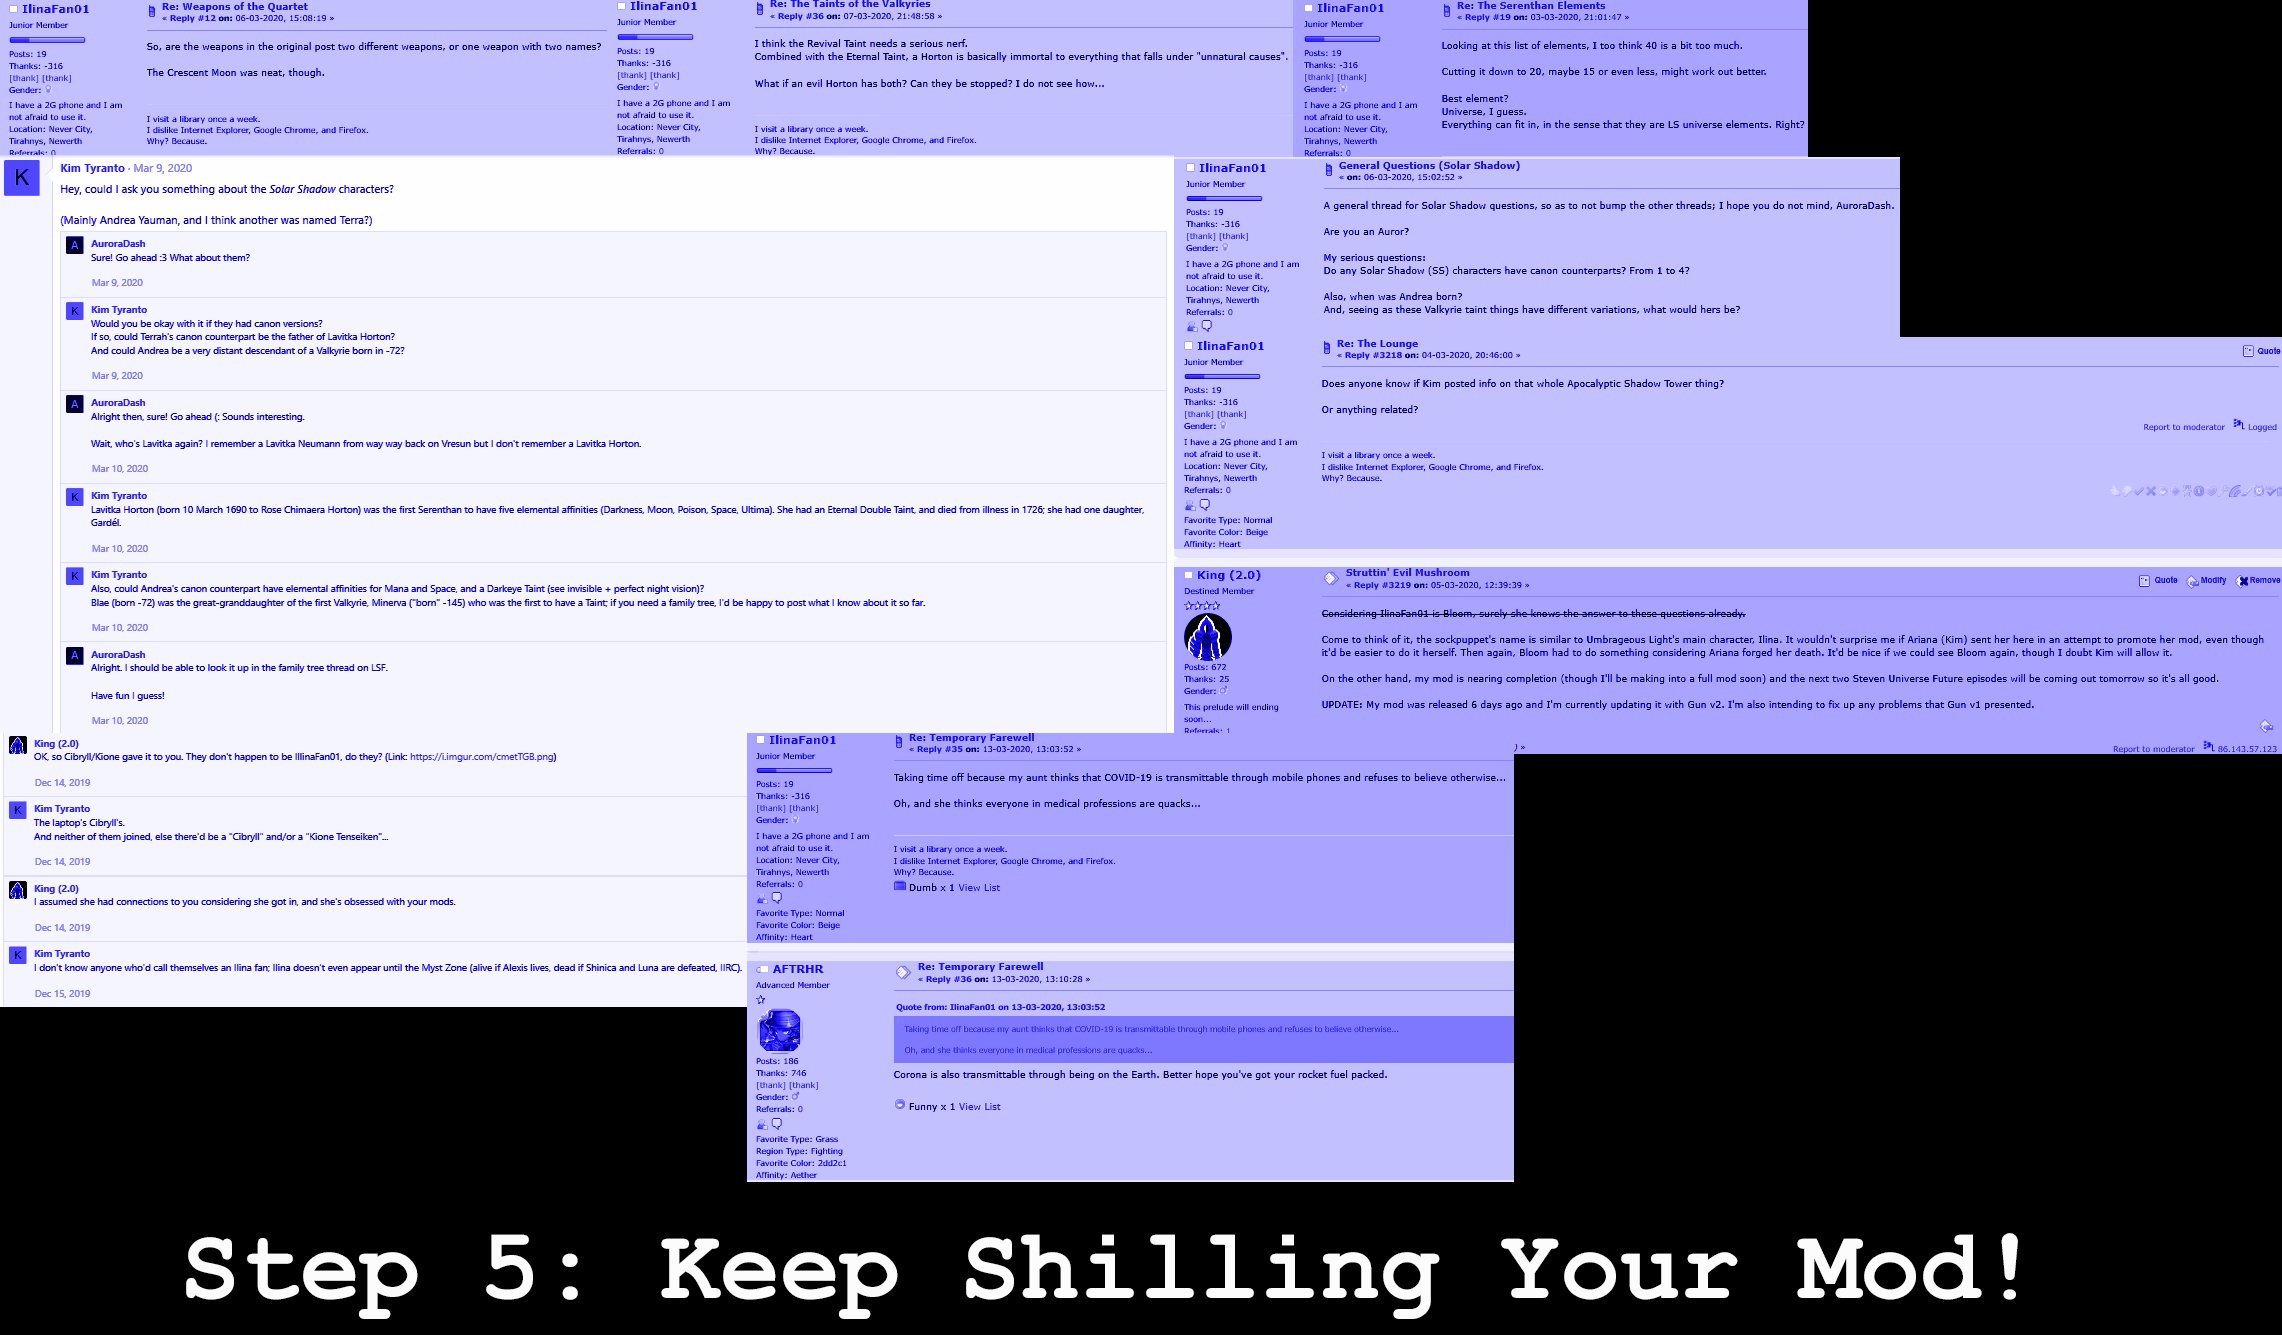 How 2 Shill Your Mod Page 8.png